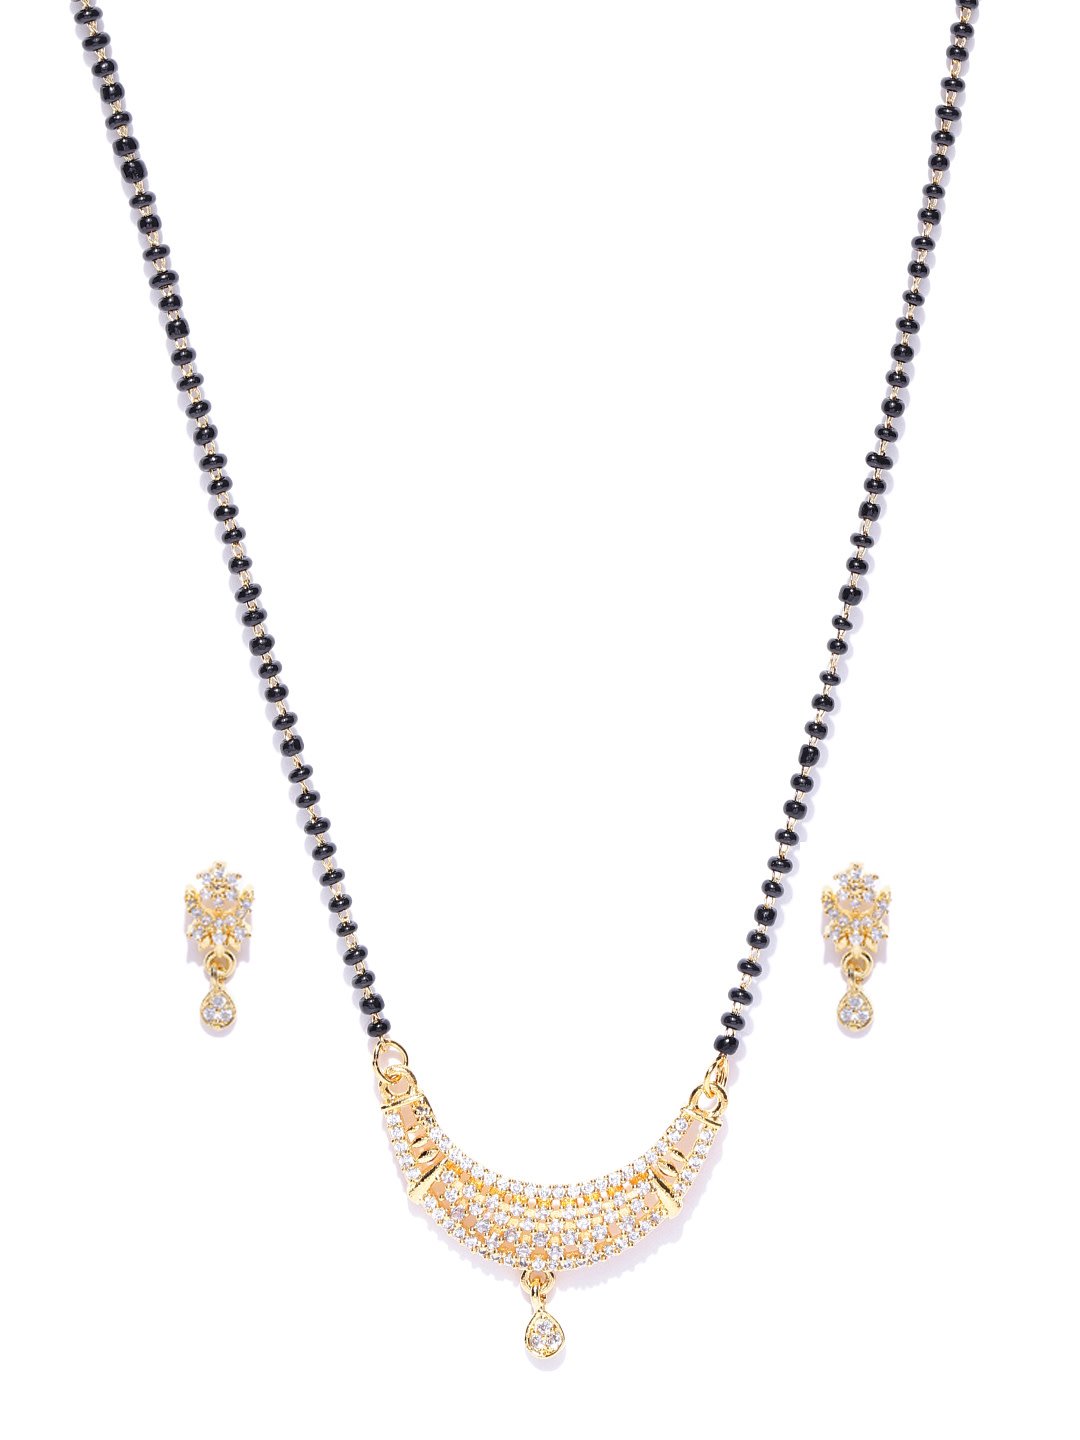 Buy quality 916 gold mother Pearl Design mangalsutra with Earrings in  Ahmedabad